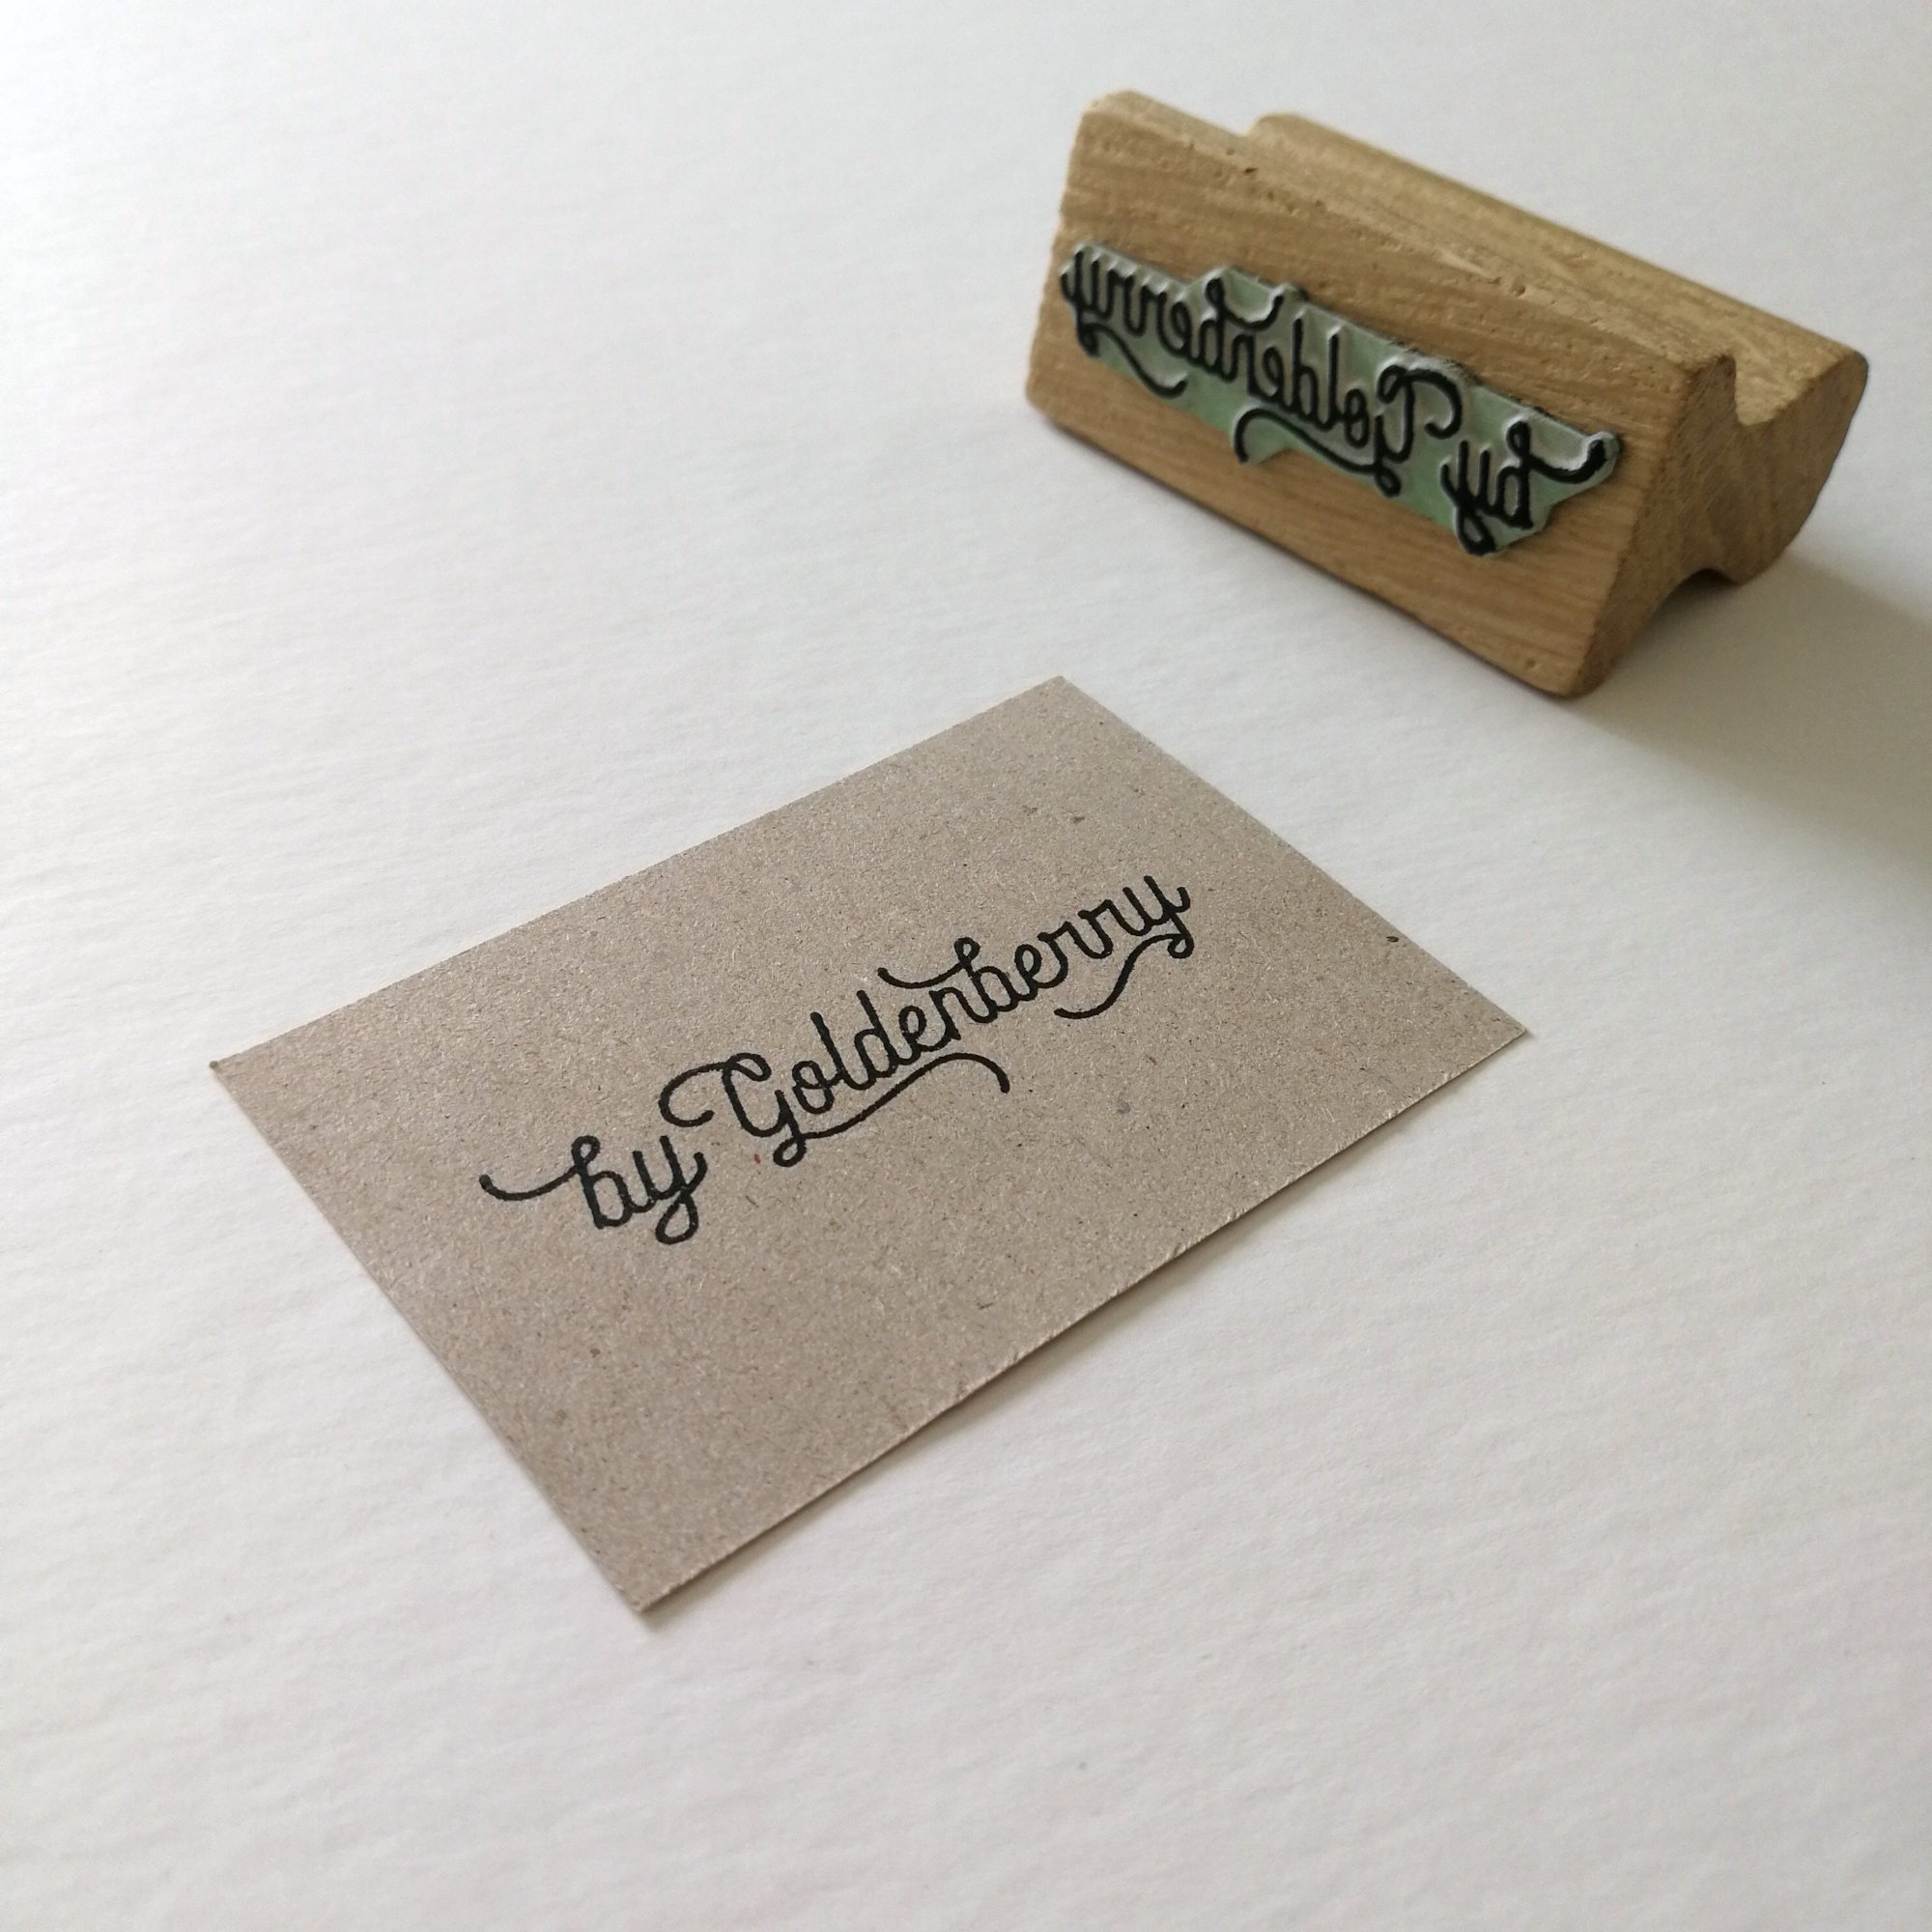 Finding a Sustainable Stamp for byGoldenberry